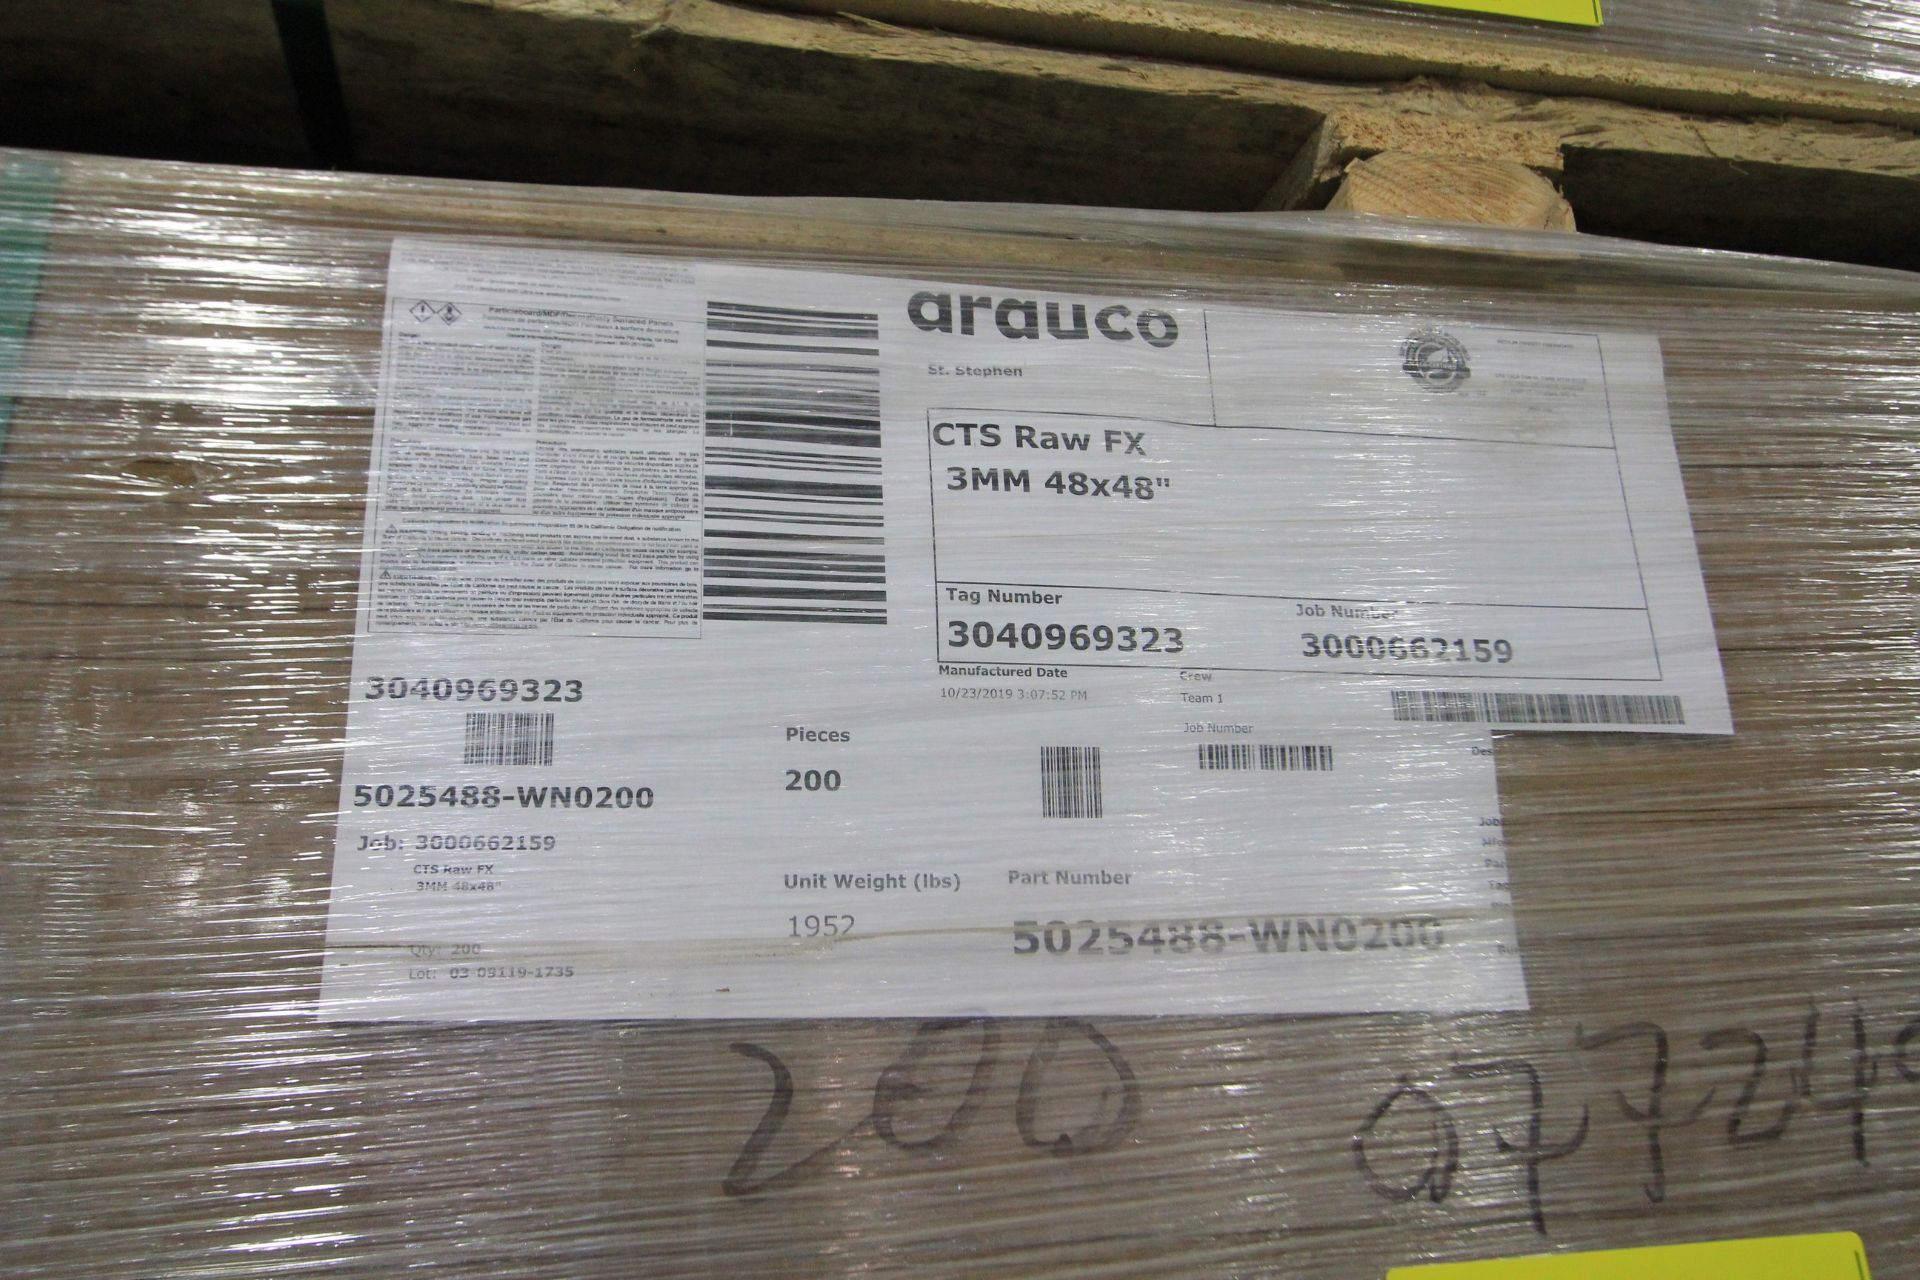 LOT OF APPROX. (200) SHEETS OF 3MM X 48" X 48" WOOD, ARAUCO CTS RAW FX - Image 2 of 2